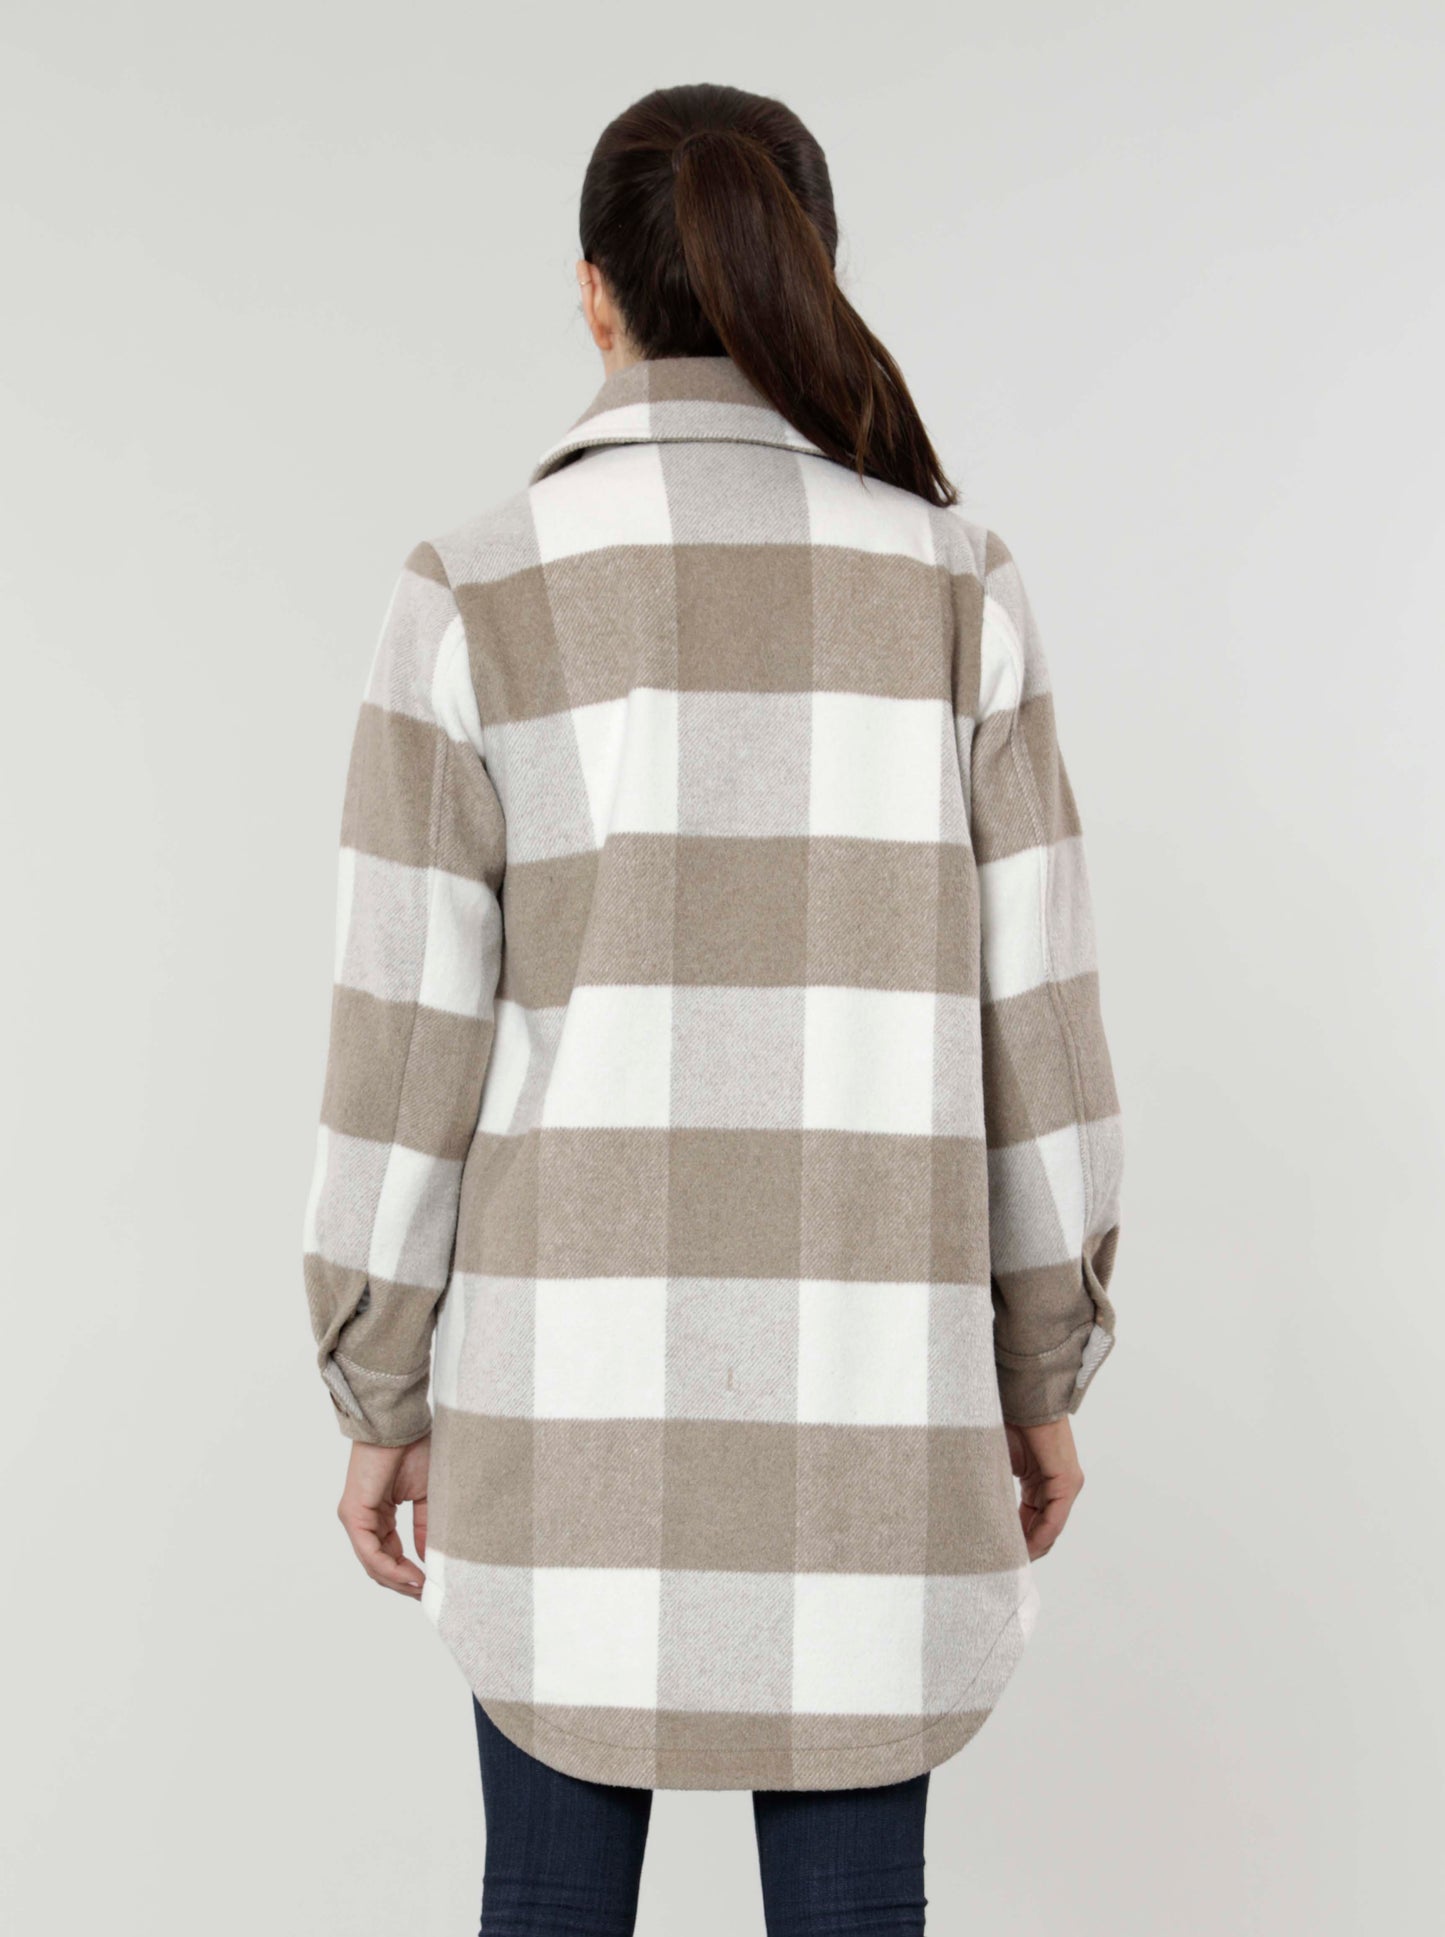 Load image into Gallery viewer, Long Plaid Shacket
